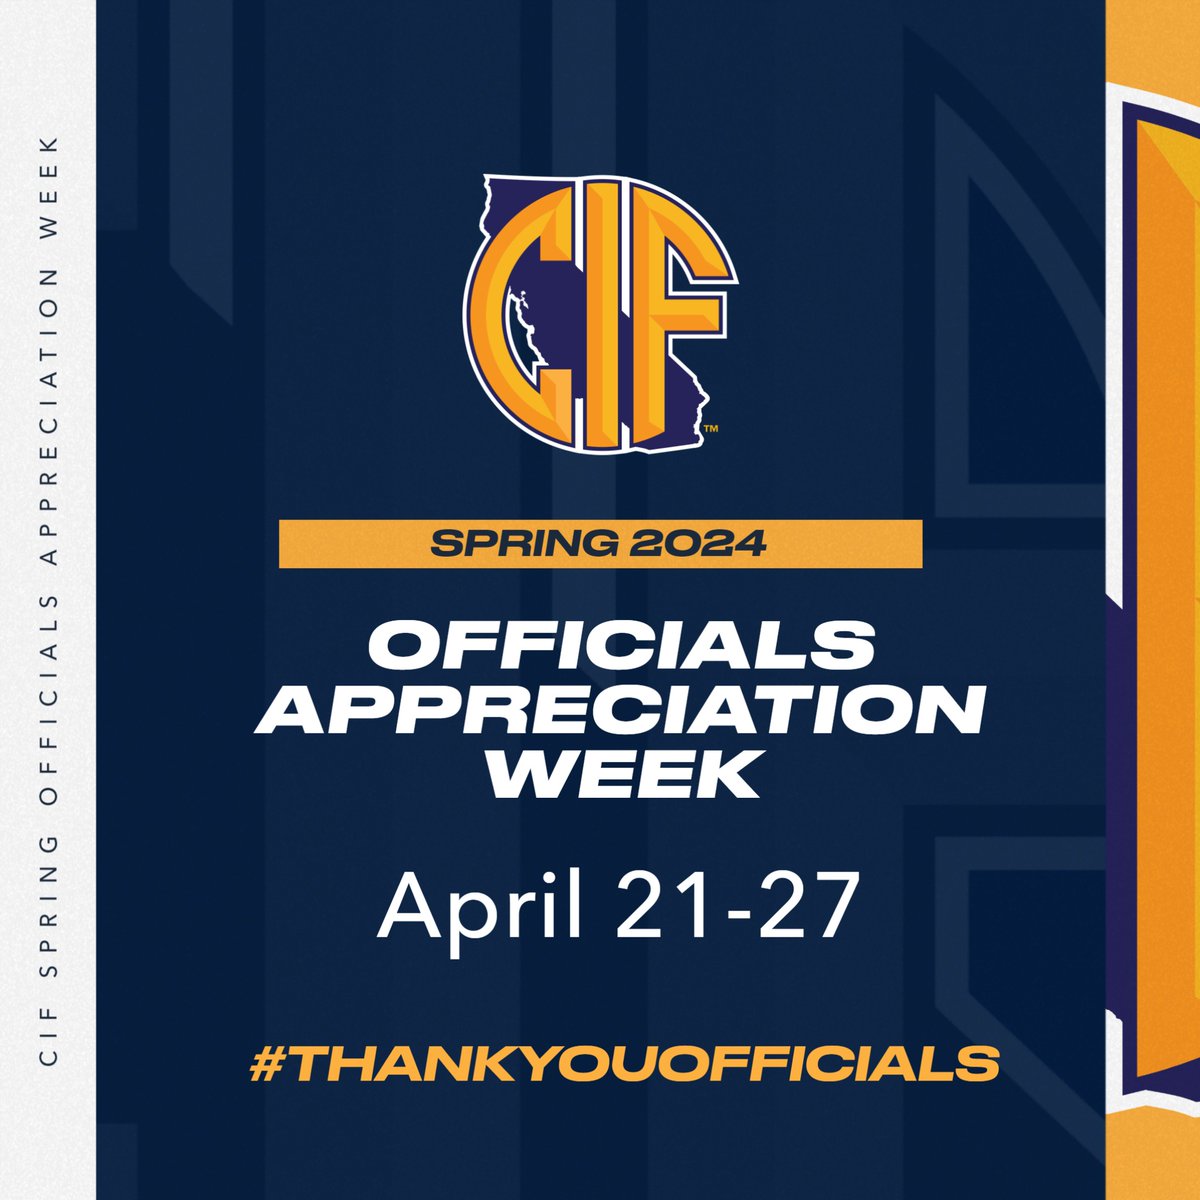 Today begins CIF Spring Officials Appreciation Week! How will you thank your contest officials? Be sure to post your activity on social media and tag us to bring awareness to the importance of education-based officials in all our sports! #ThankYouOfficials